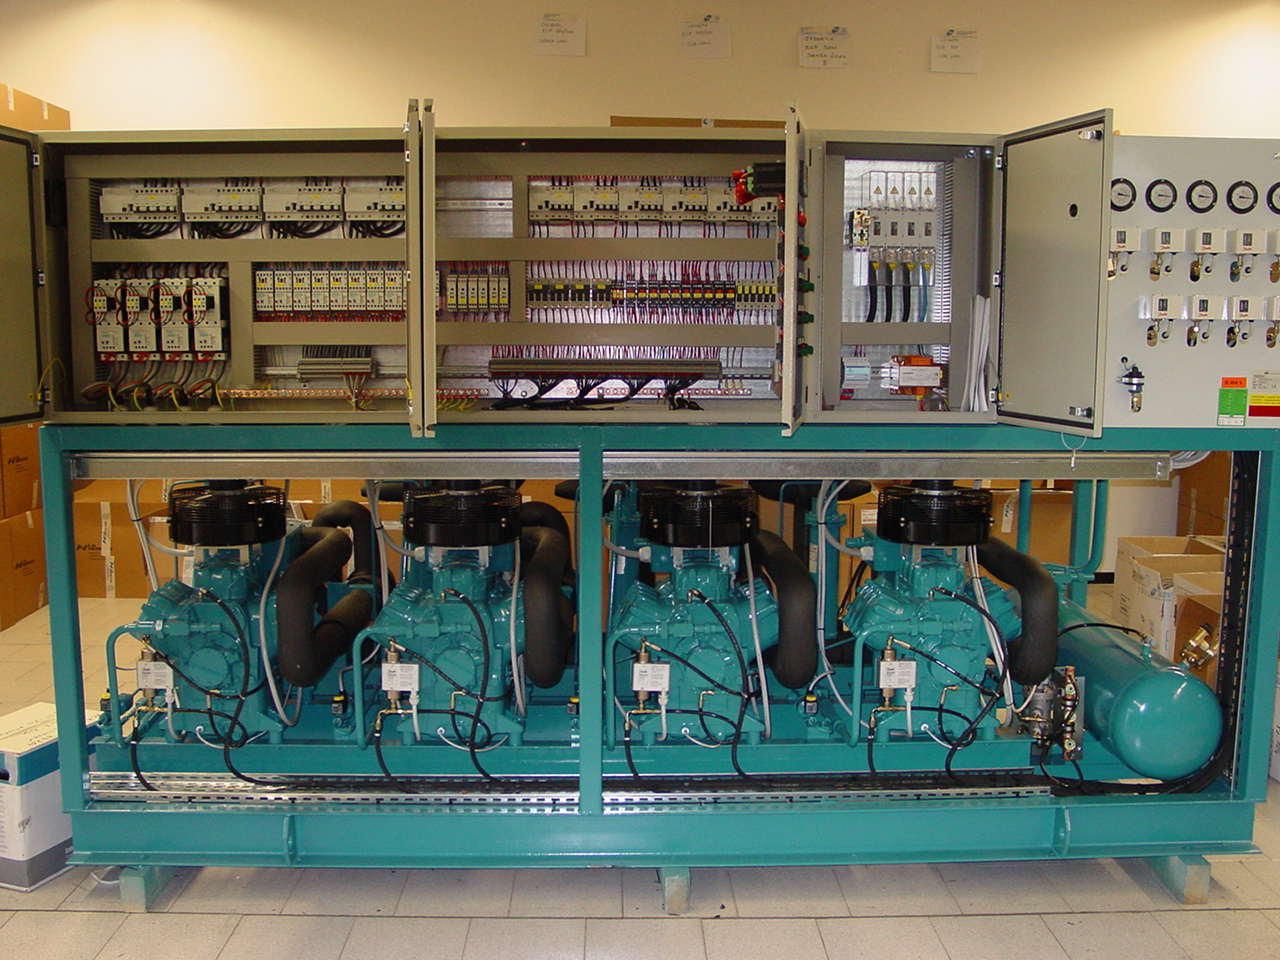 PEGO - Customized control panels for refrigeration plants.